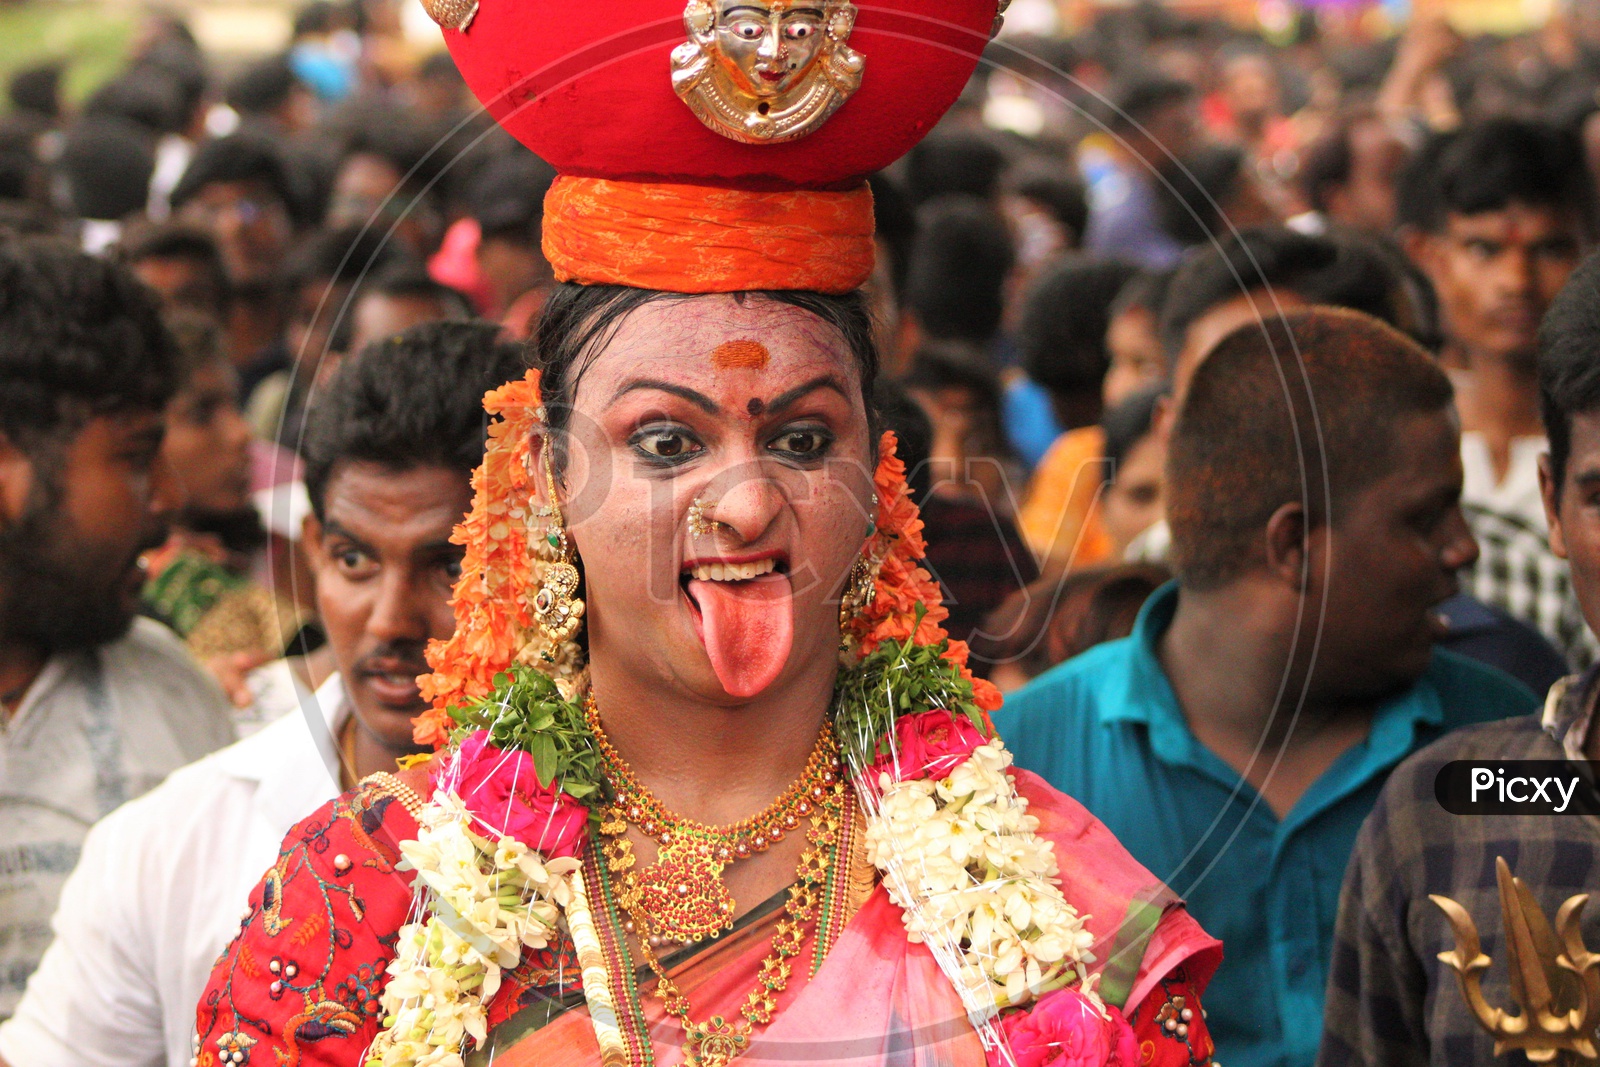 Telangana Woman Carrying Bonam On Her Head And With an Expression on Face